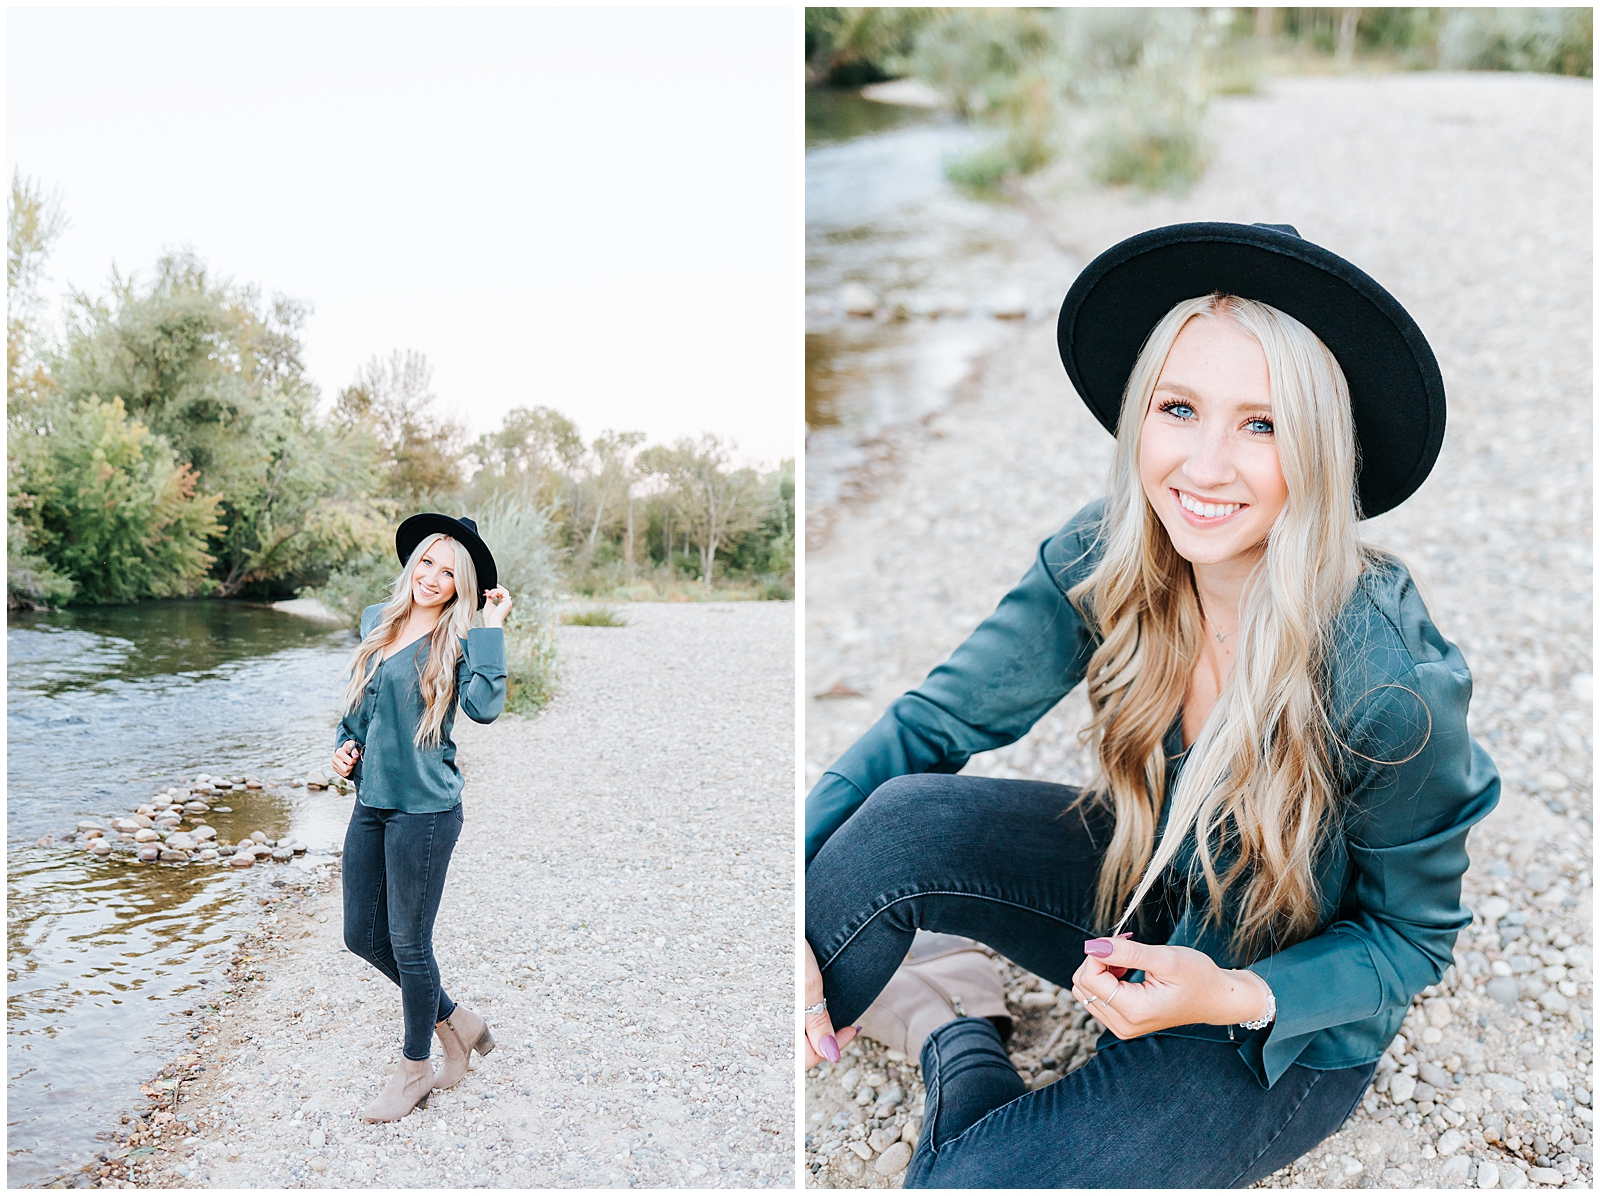 Dreamy Senior Session by the Boise River with trendy black hat